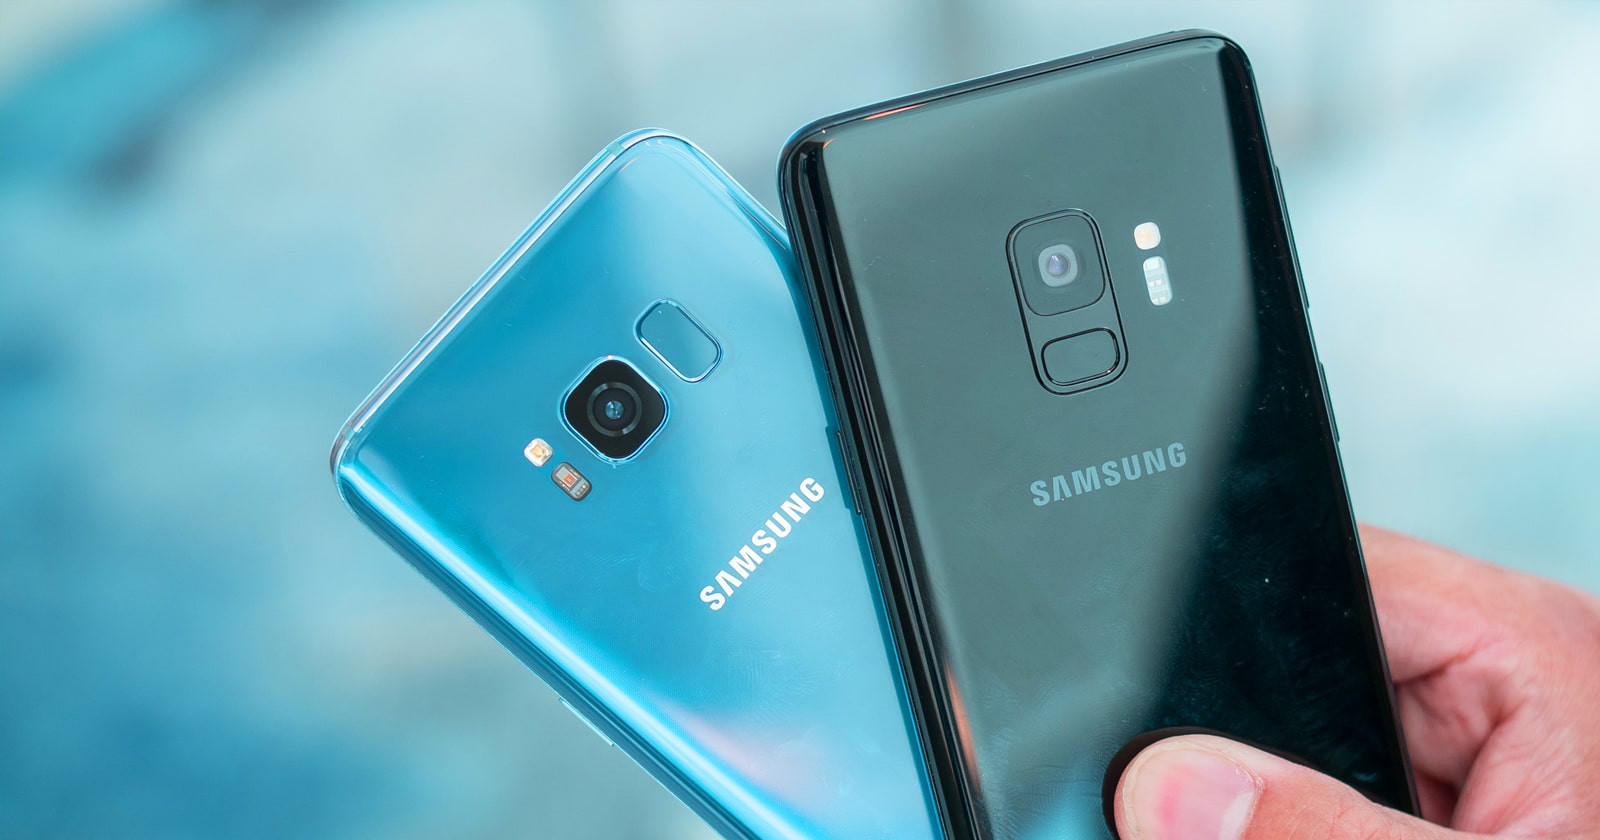 What is the difference between samsung s8 and s8 plus